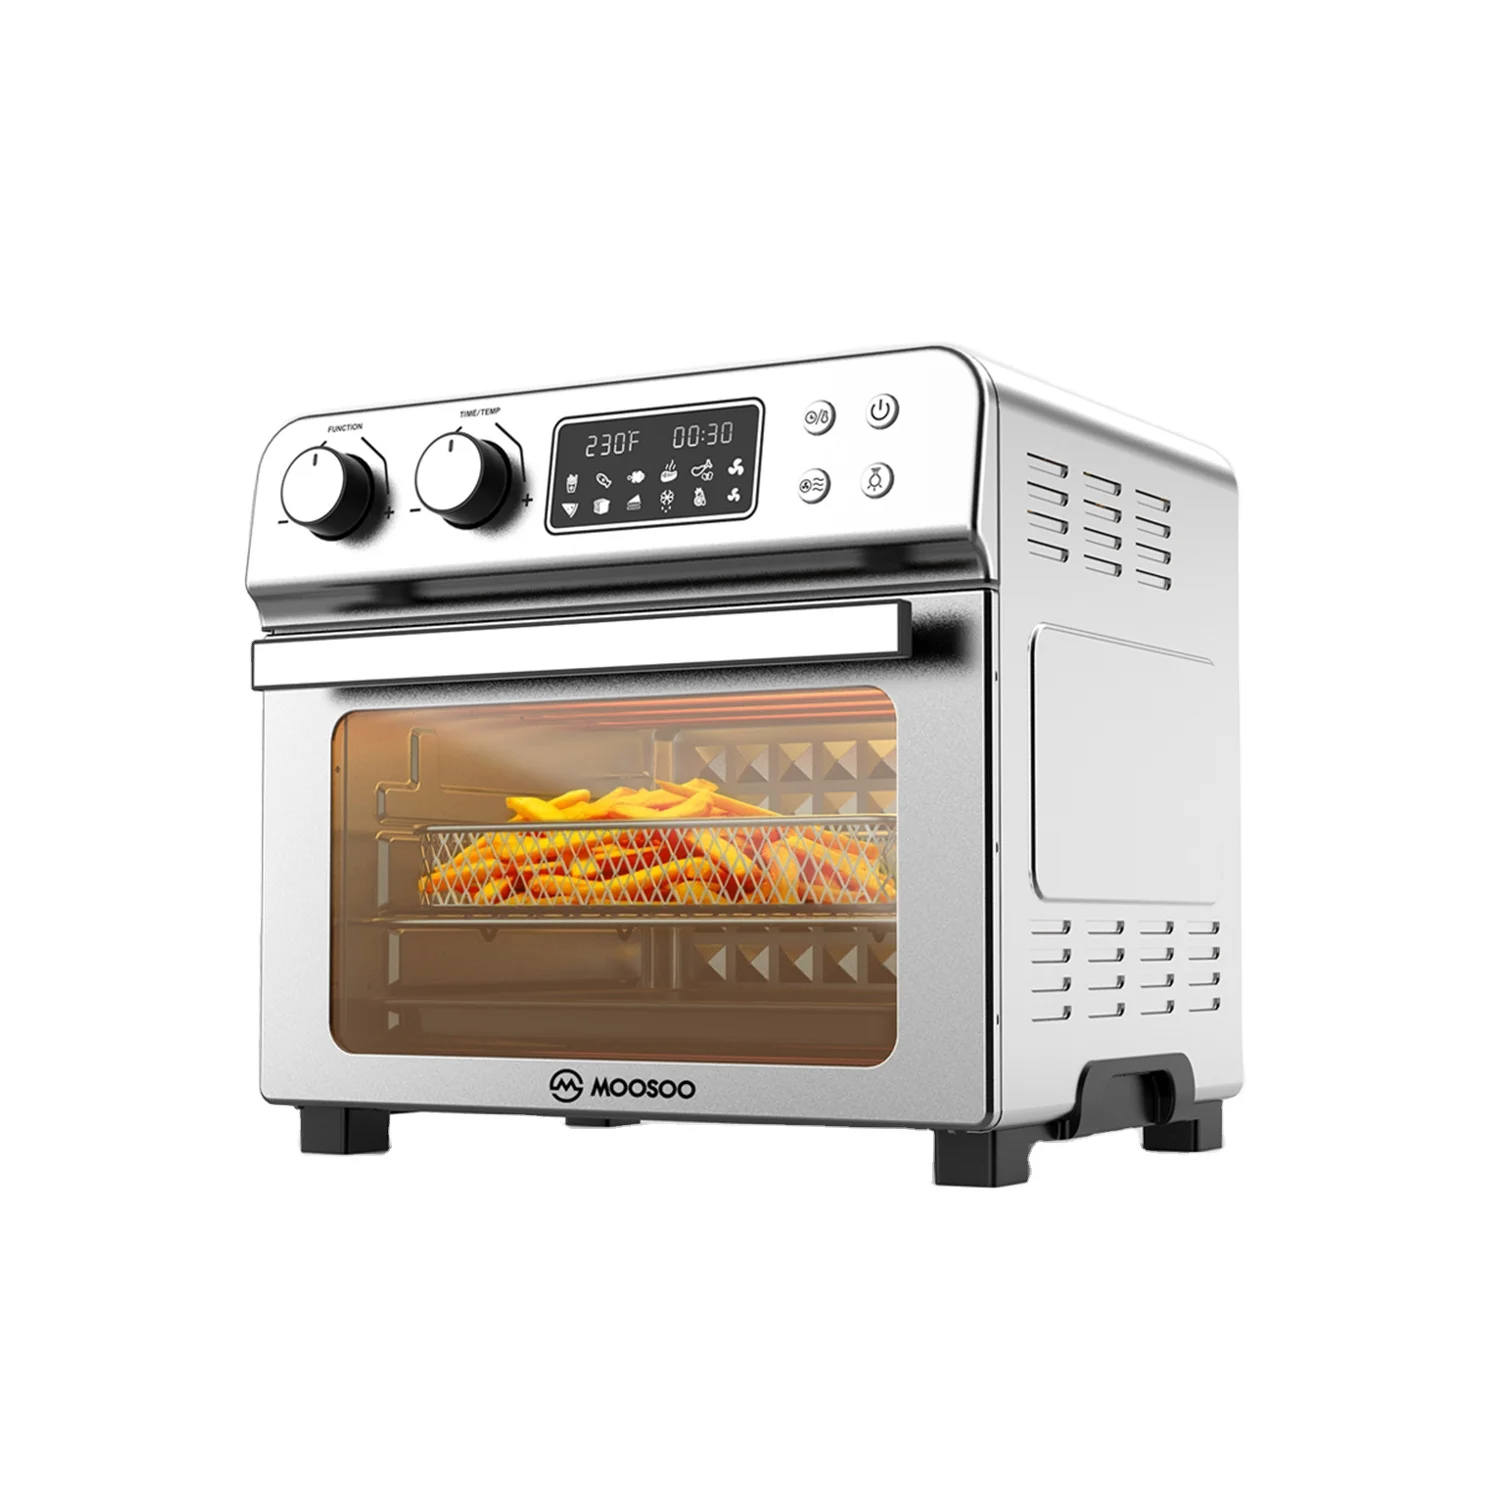 

MooSoo MA11 1700W 23L Large Air Fryer Oven Electric Oil Free Baking Air oven Air Fry